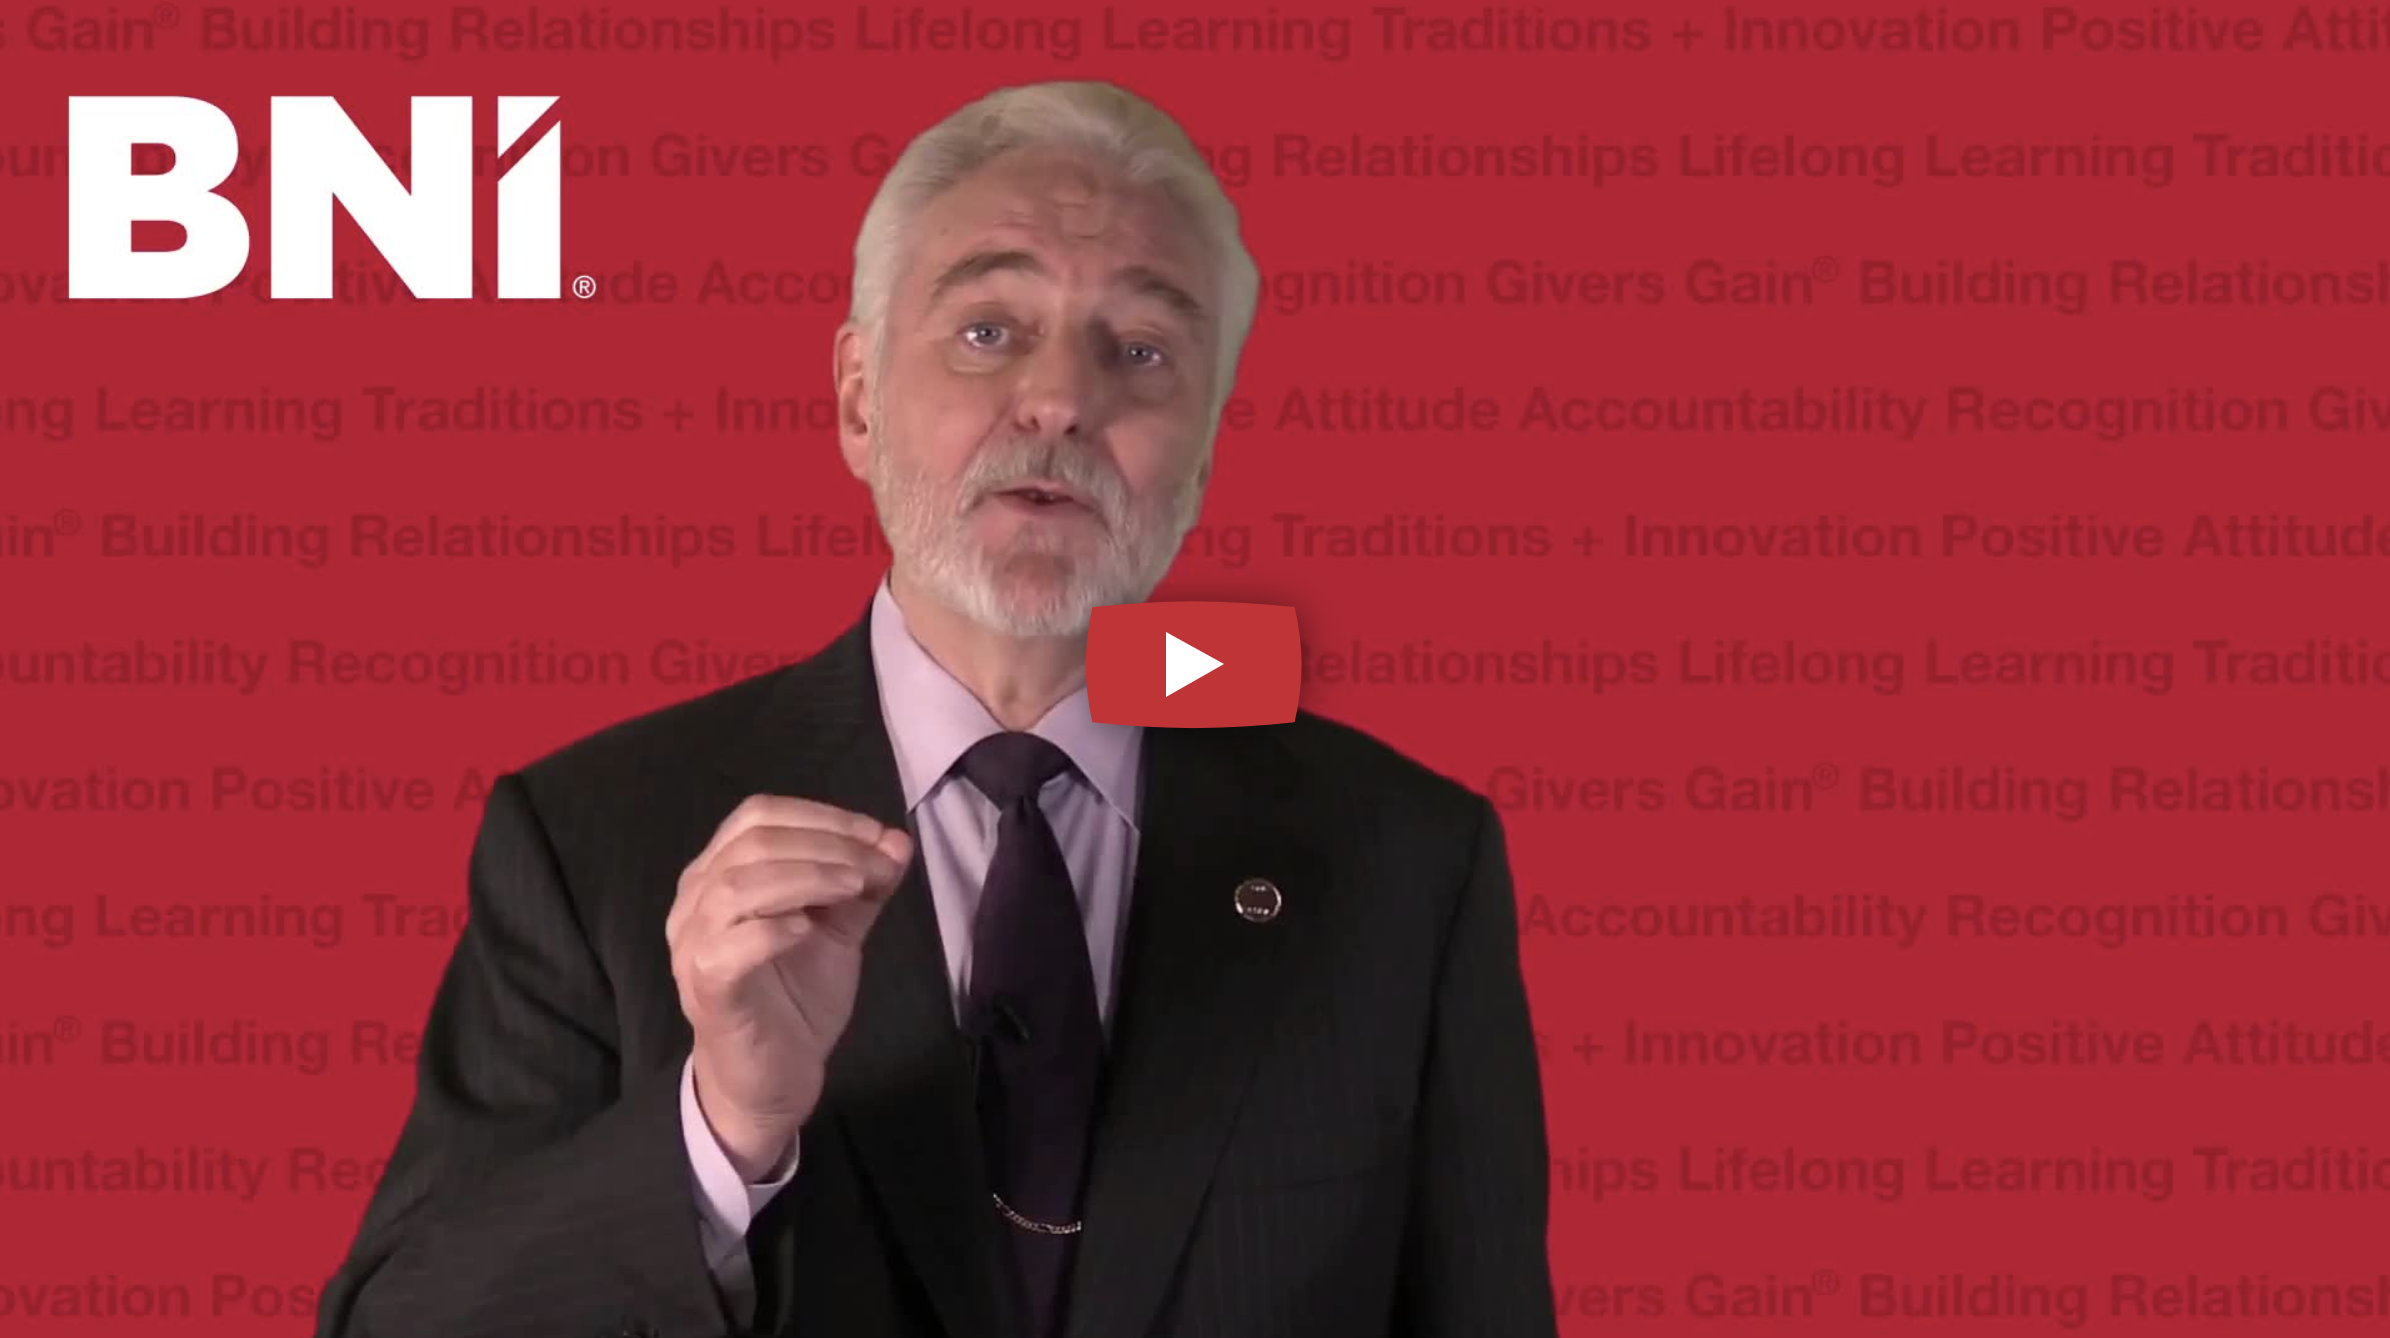 Welcome Message from BNI's founder Ivan Misner